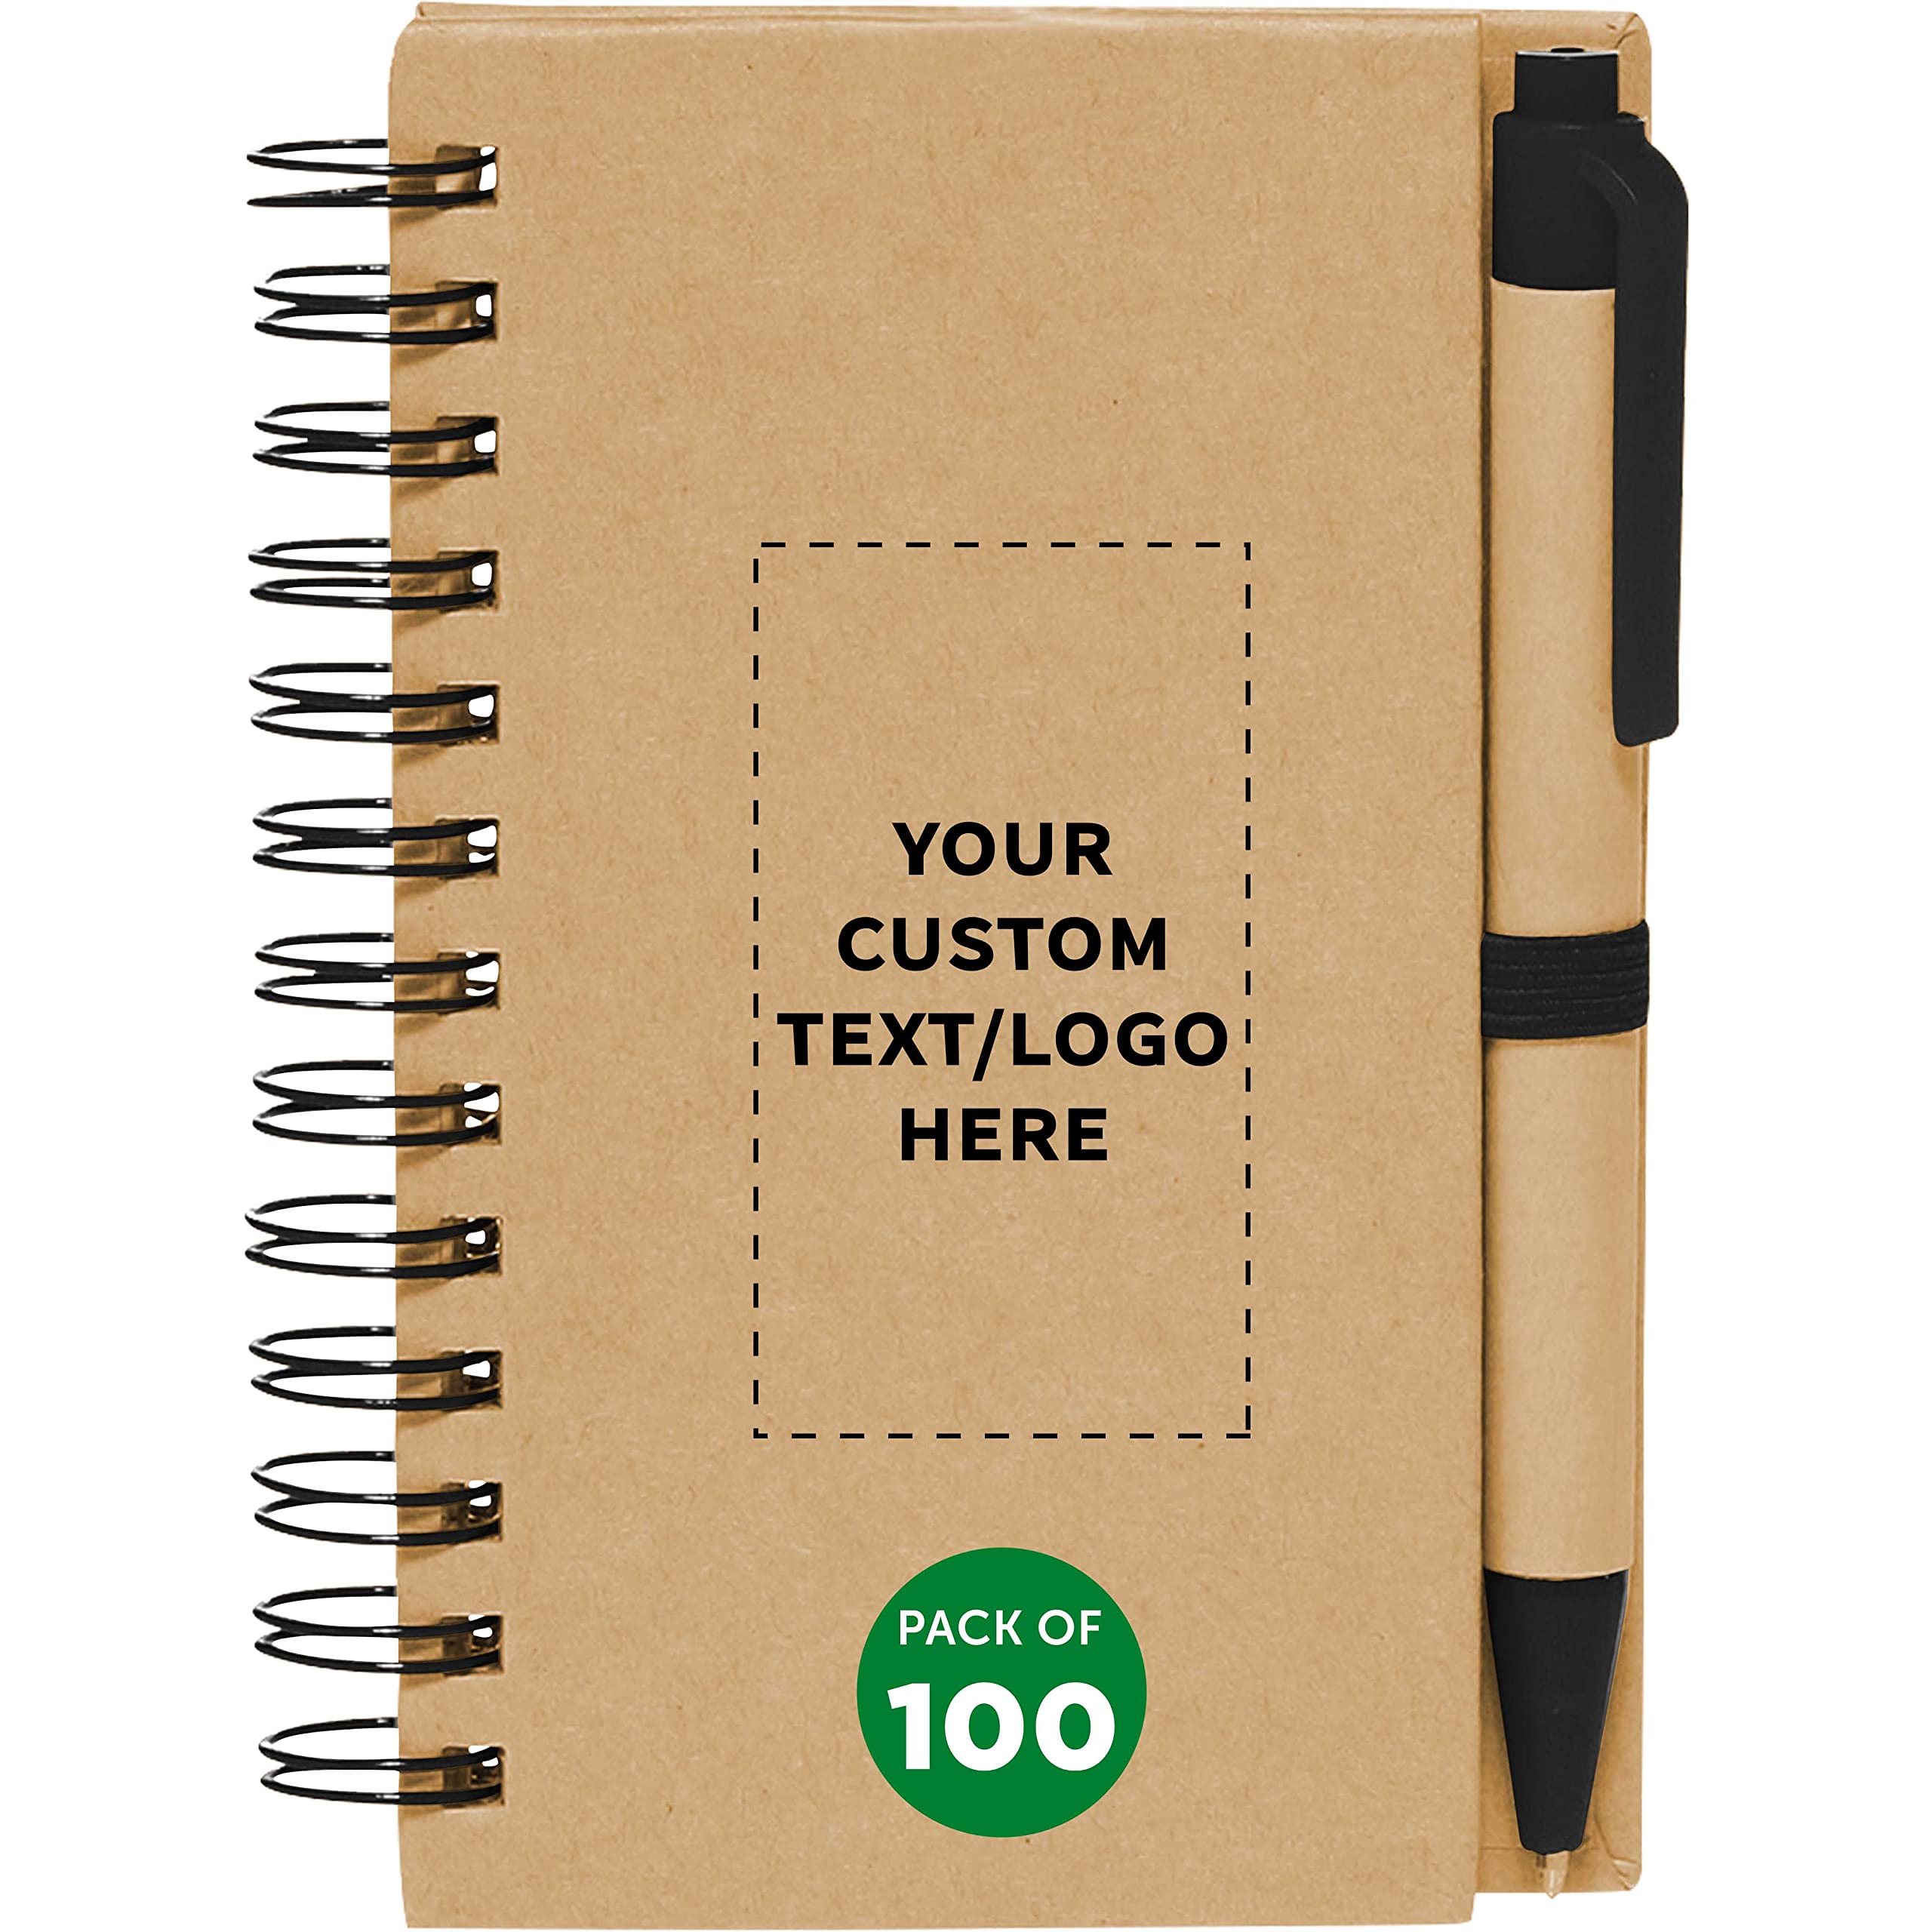 Custom Mini Spiral Notebooks with Black Ink Pens Set of 100, Personalized Bulk Pack - Perfect for School, Office, Business, Home - Black